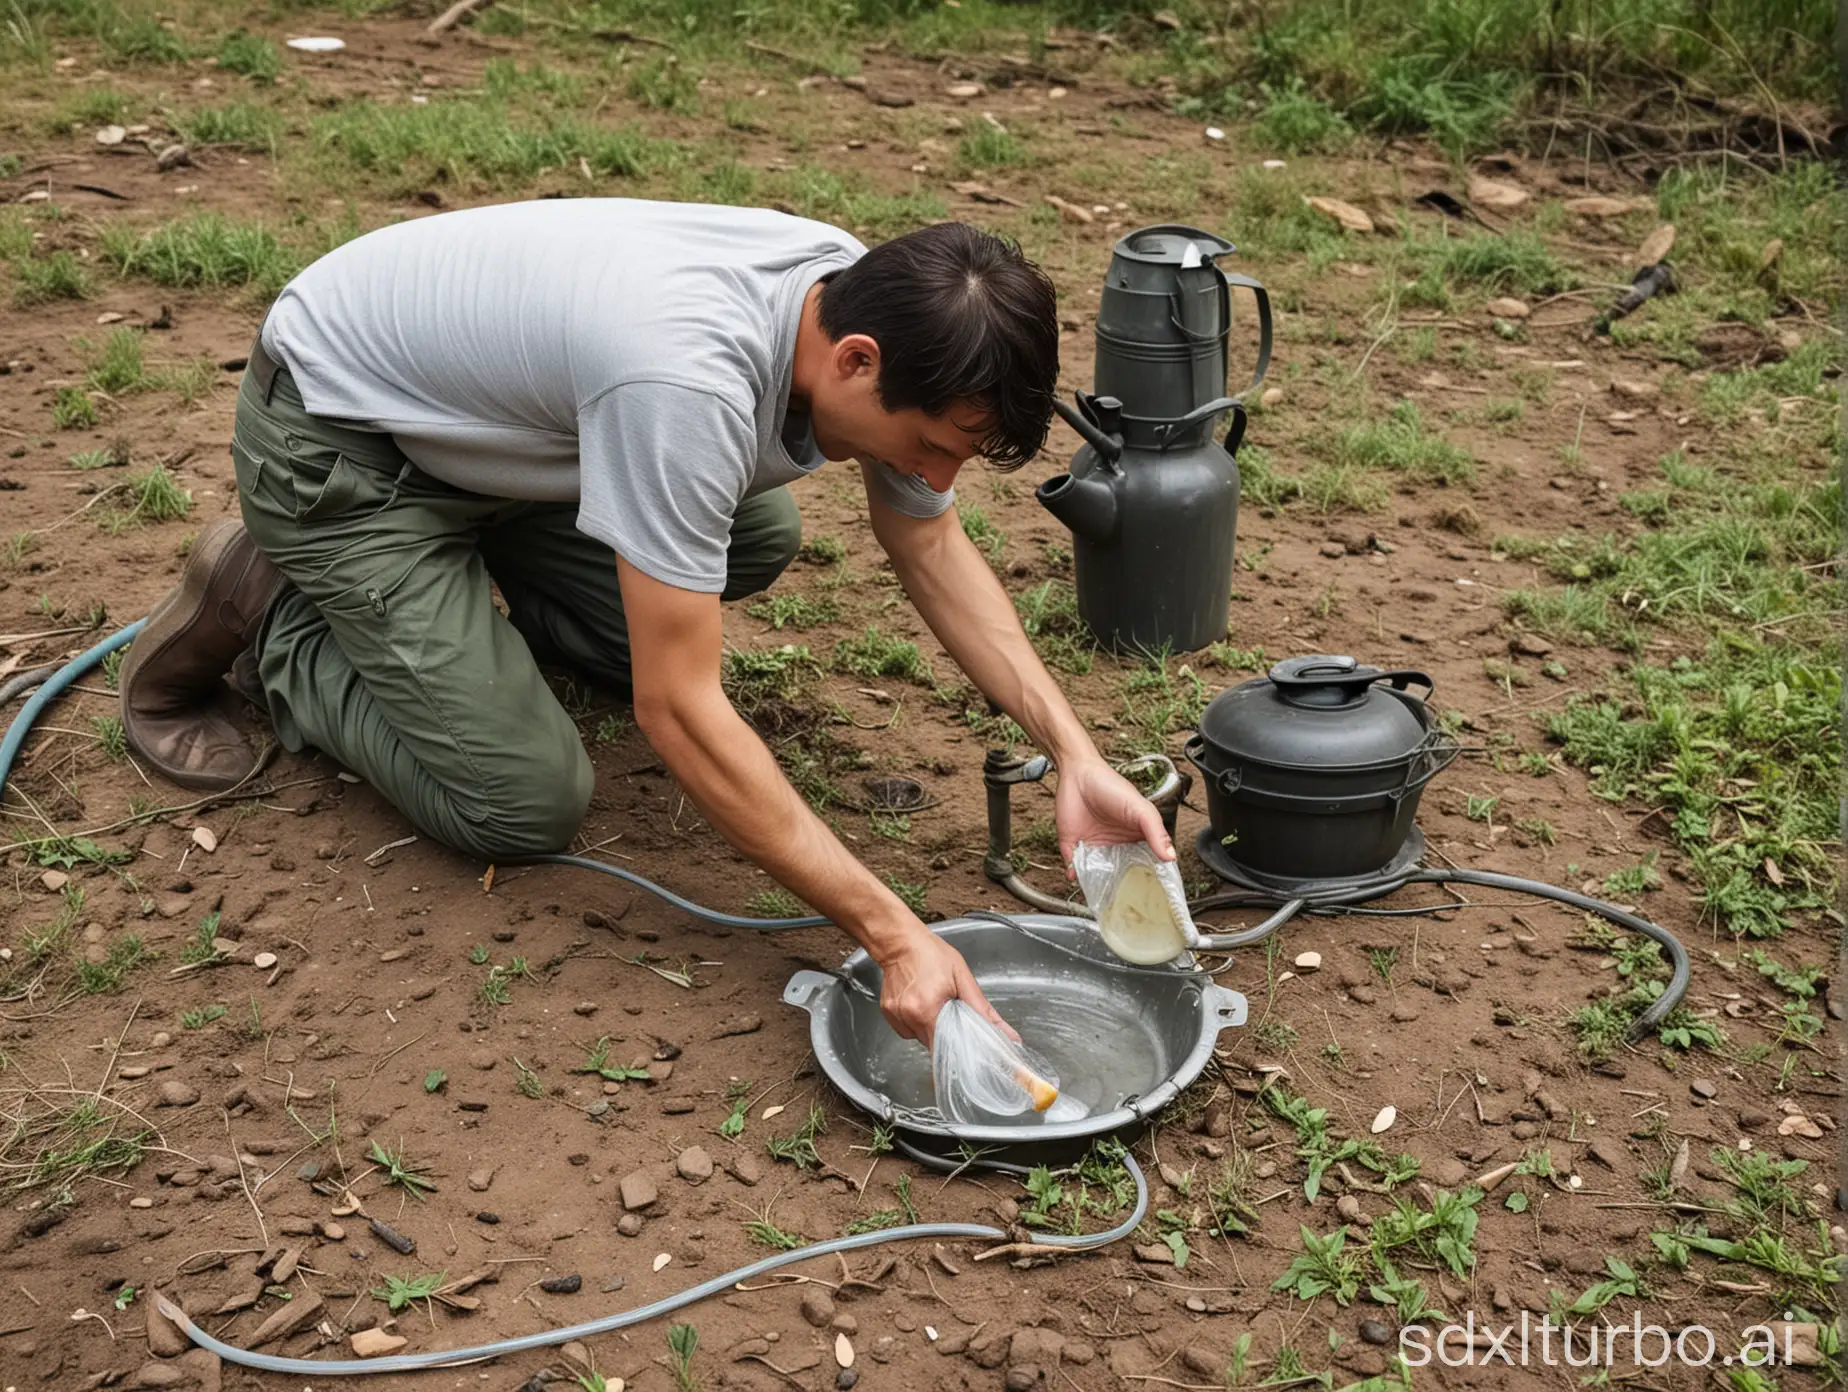 Man-Washing-Tableware-with-Hose-in-Wild-Setting